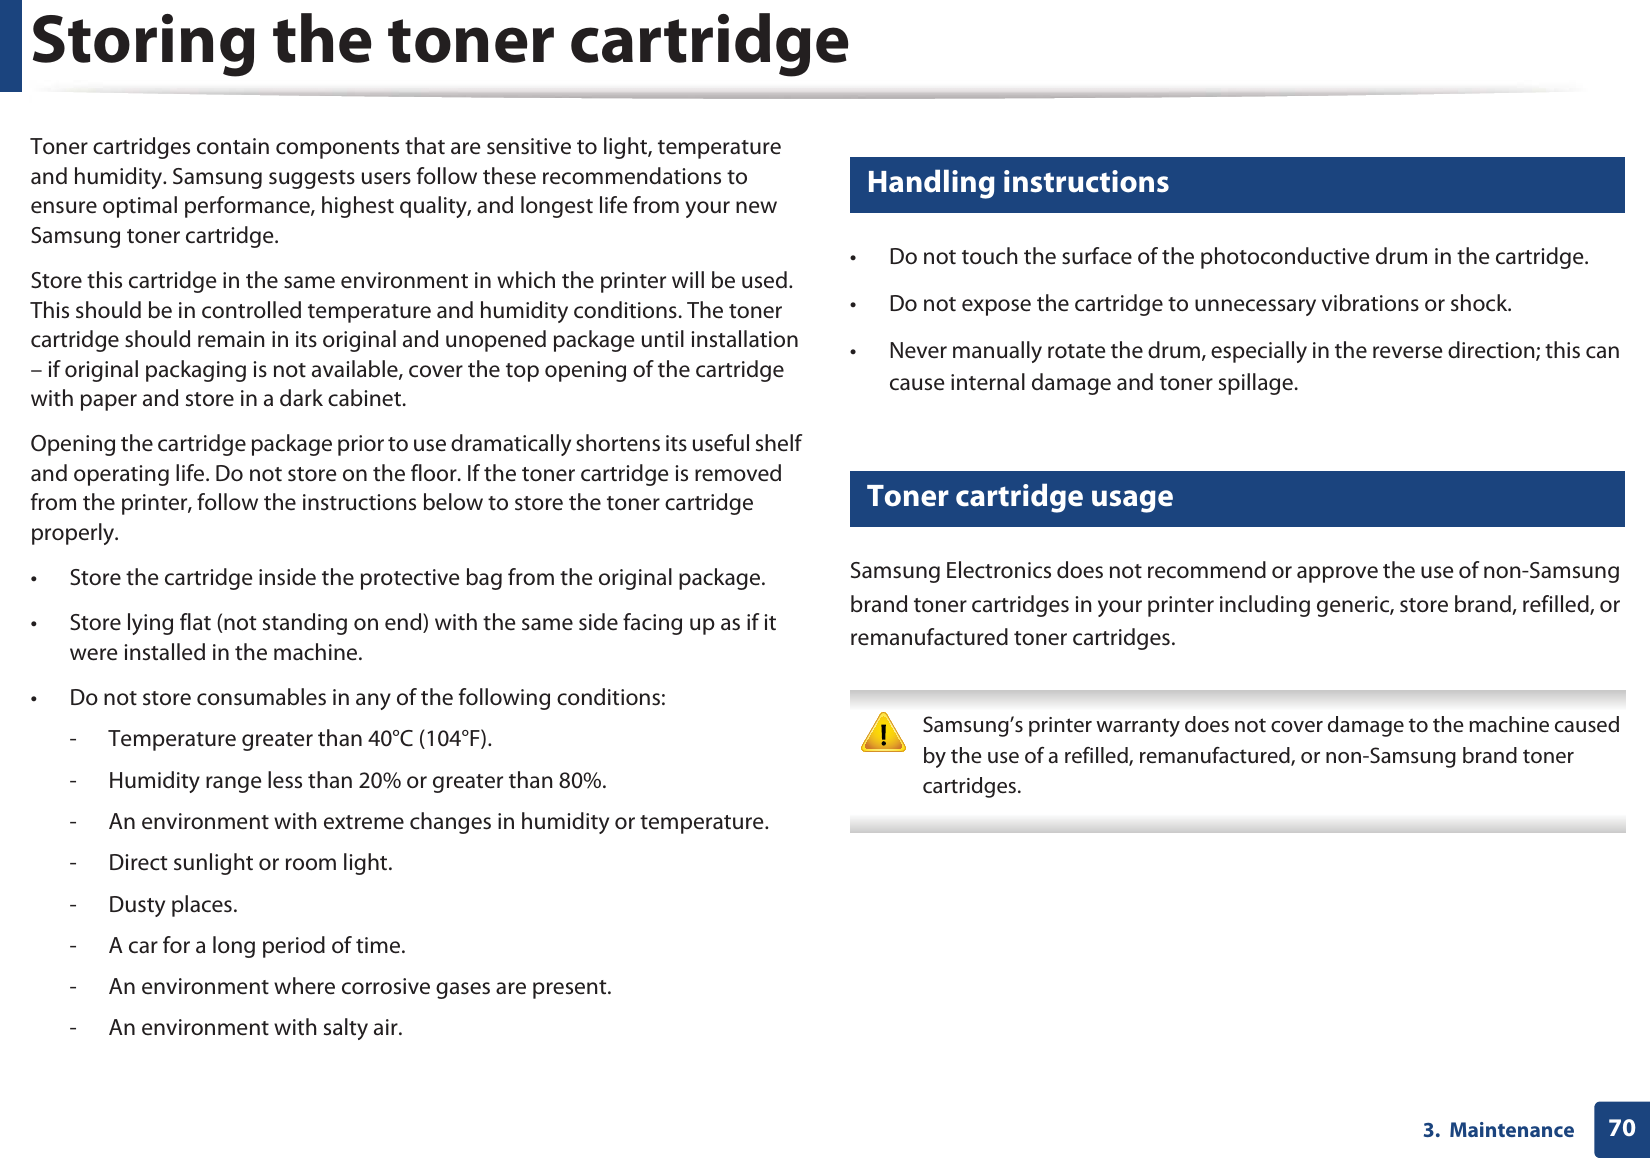 703.  MaintenanceStoring the toner cartridgeToner cartridges contain components that are sensitive to light, temperature and humidity. Samsung suggests users follow these recommendations to ensure optimal performance, highest quality, and longest life from your new Samsung toner cartridge.Store this cartridge in the same environment in which the printer will be used. This should be in controlled temperature and humidity conditions. The toner cartridge should remain in its original and unopened package until installation – if original packaging is not available, cover the top opening of the cartridge with paper and store in a dark cabinet.Opening the cartridge package prior to use dramatically shortens its useful shelf and operating life. Do not store on the floor. If the toner cartridge is removed from the printer, follow the instructions below to store the toner cartridge properly.• Store the cartridge inside the protective bag from the original package. • Store lying flat (not standing on end) with the same side facing up as if it were installed in the machine.• Do not store consumables in any of the following conditions:- Temperature greater than 40°C (104°F).- Humidity range less than 20% or greater than 80%.- An environment with extreme changes in humidity or temperature.- Direct sunlight or room light.- Dusty places.- A car for a long period of time.- An environment where corrosive gases are present.- An environment with salty air.1 Handling instructions• Do not touch the surface of the photoconductive drum in the cartridge.• Do not expose the cartridge to unnecessary vibrations or shock.• Never manually rotate the drum, especially in the reverse direction; this can cause internal damage and toner spillage.2 Toner cartridge usageSamsung Electronics does not recommend or approve the use of non-Samsung brand toner cartridges in your printer including generic, store brand, refilled, or remanufactured toner cartridges. Samsung’s printer warranty does not cover damage to the machine caused by the use of a refilled, remanufactured, or non-Samsung brand toner cartridges. 